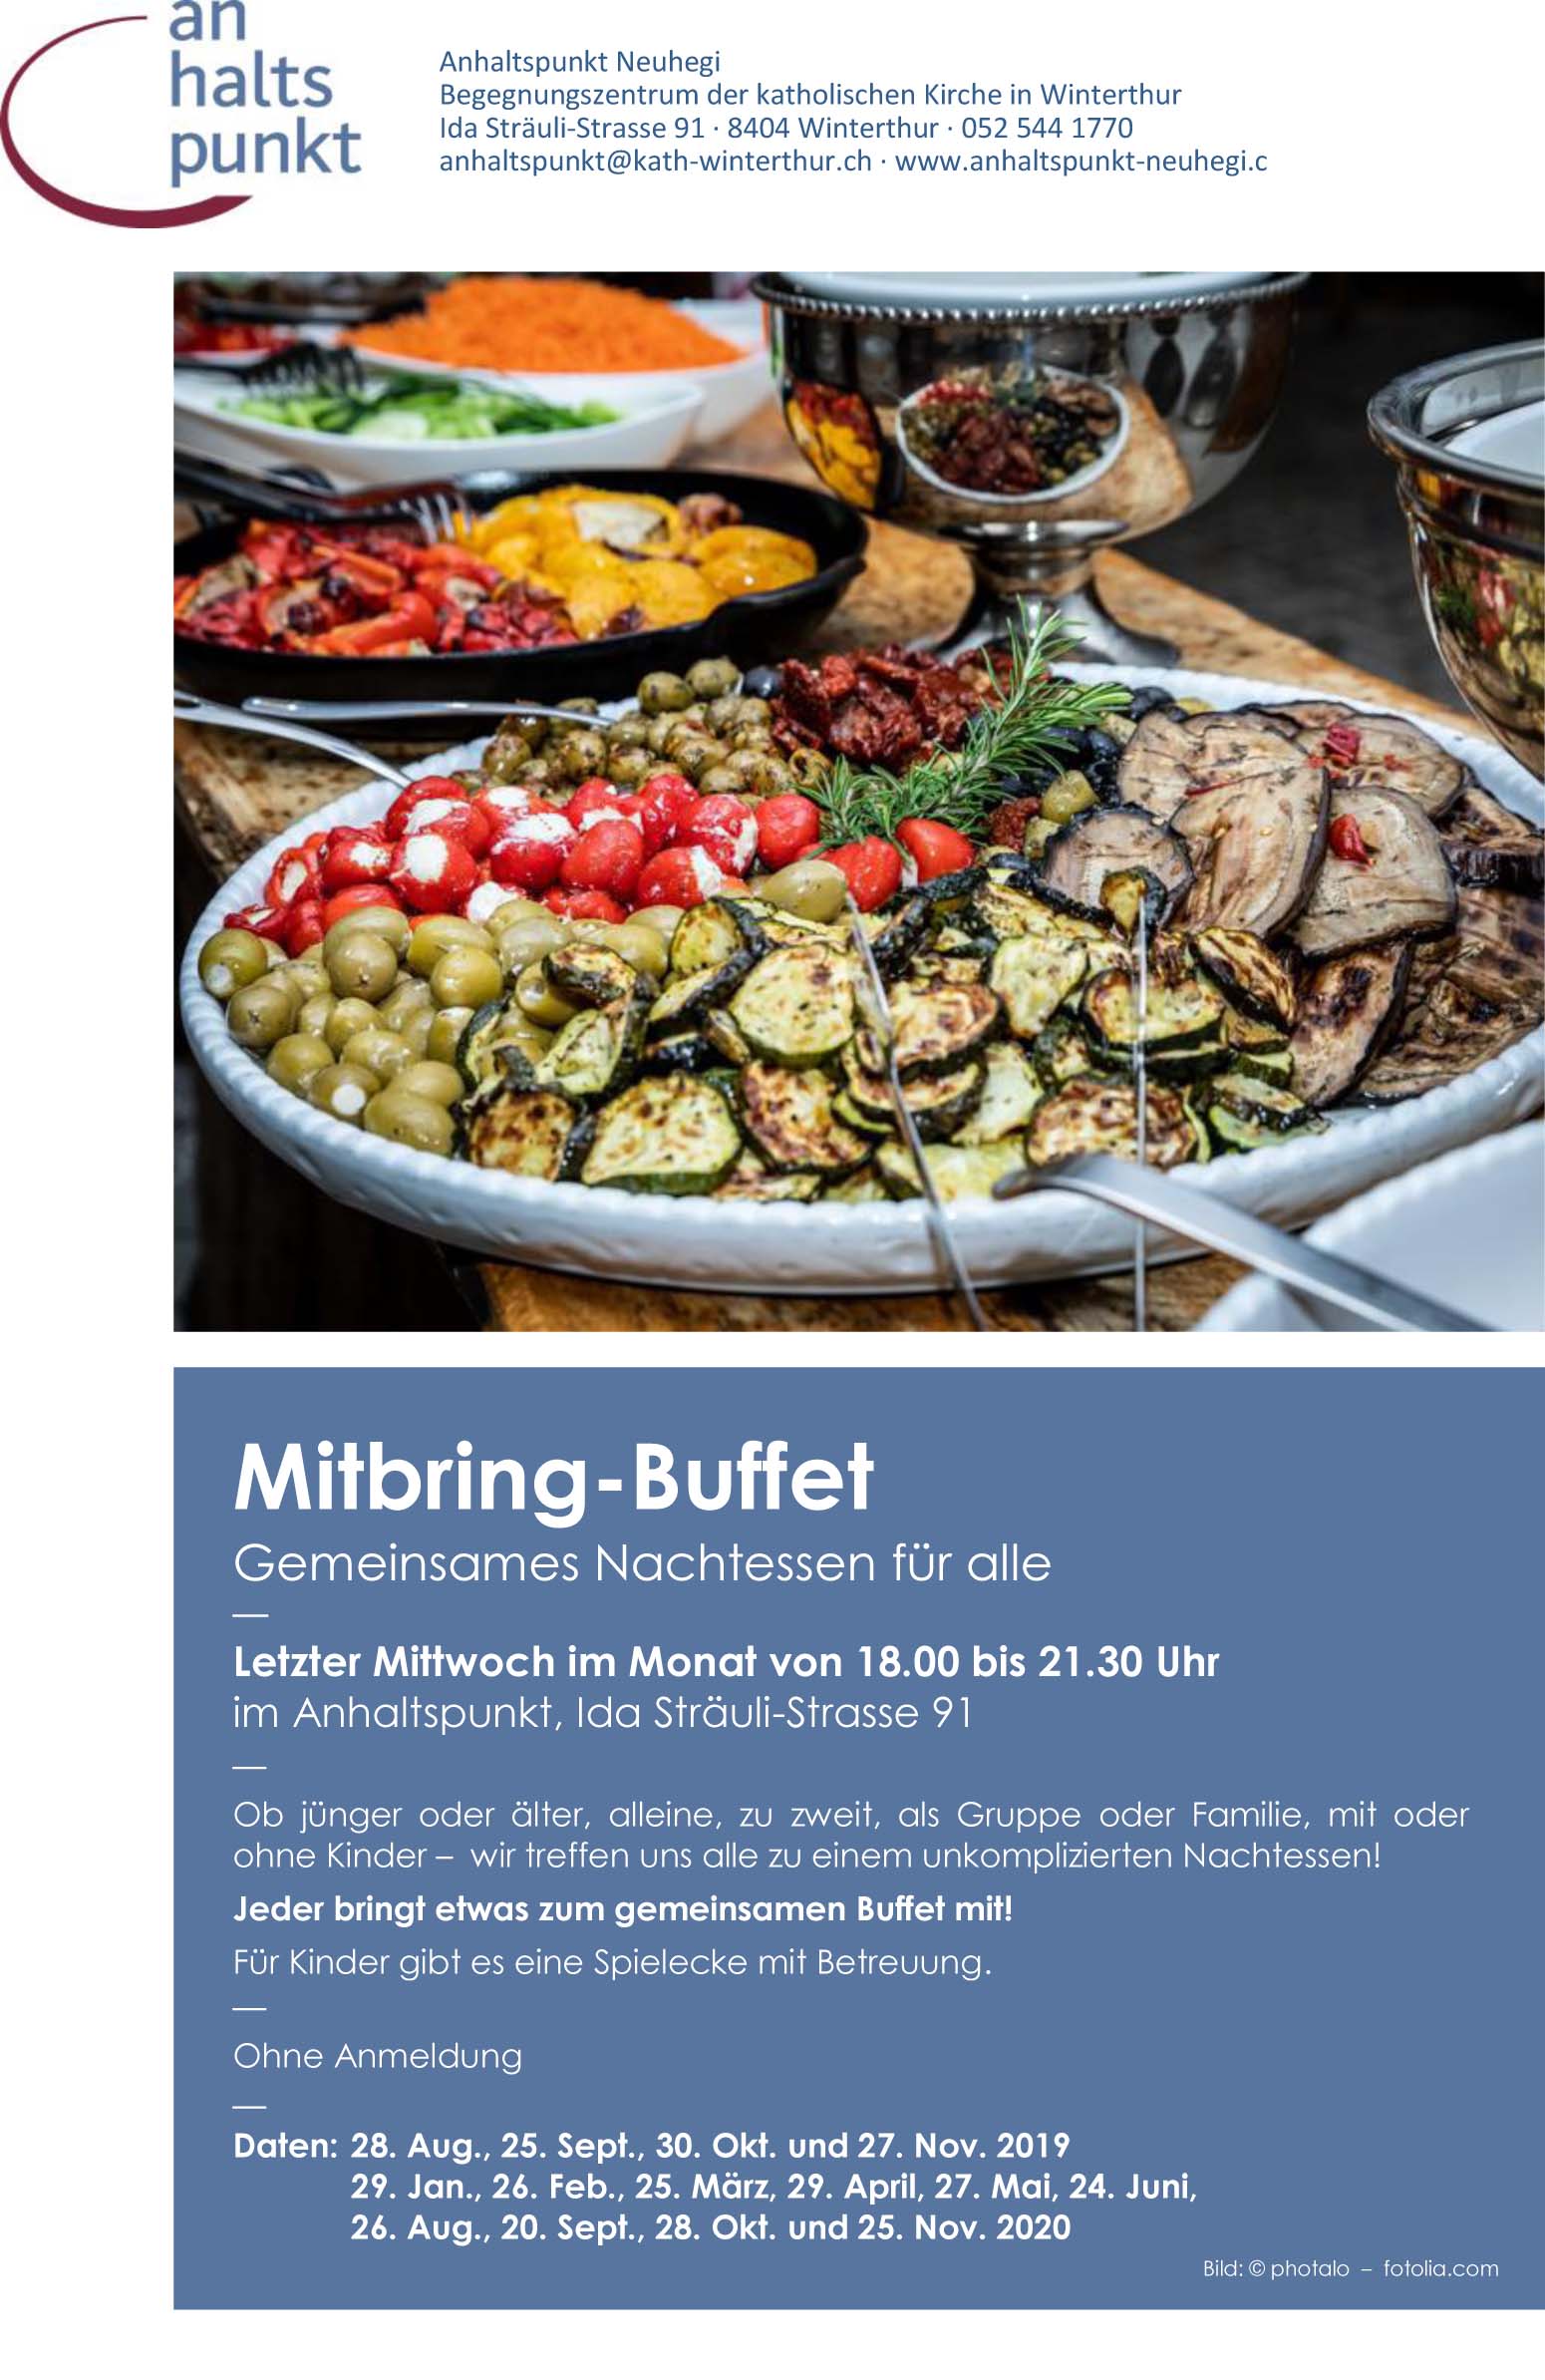 agh Mitbring Buffet 19 20